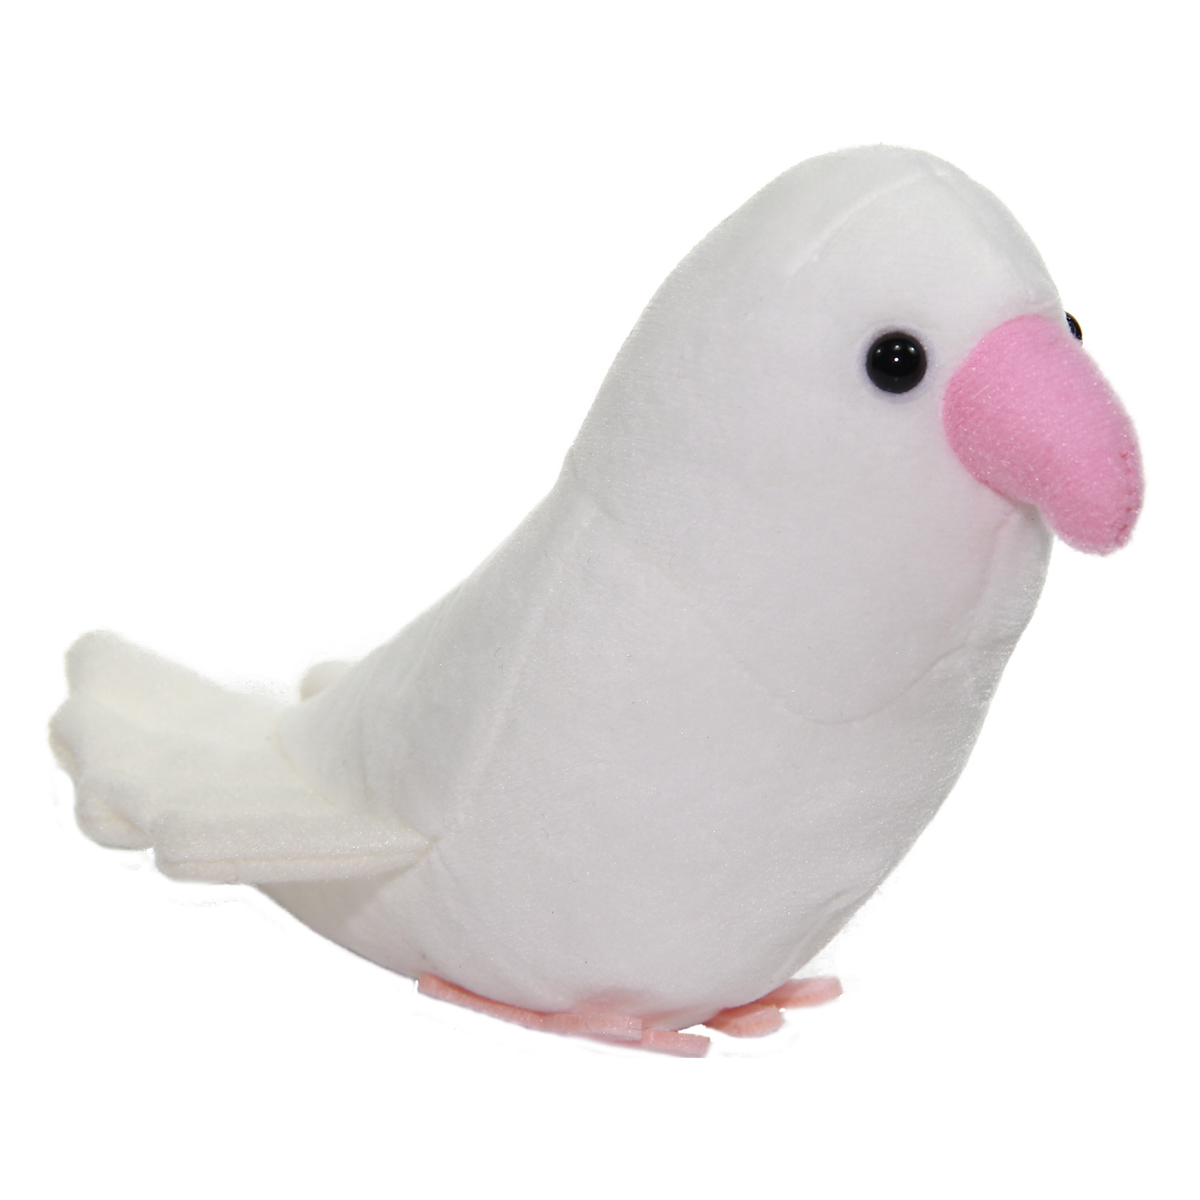 White Sparrow Plush Doll, Cute Birds Collection, Stuffed Animal Toy, White Dove 6 Inches